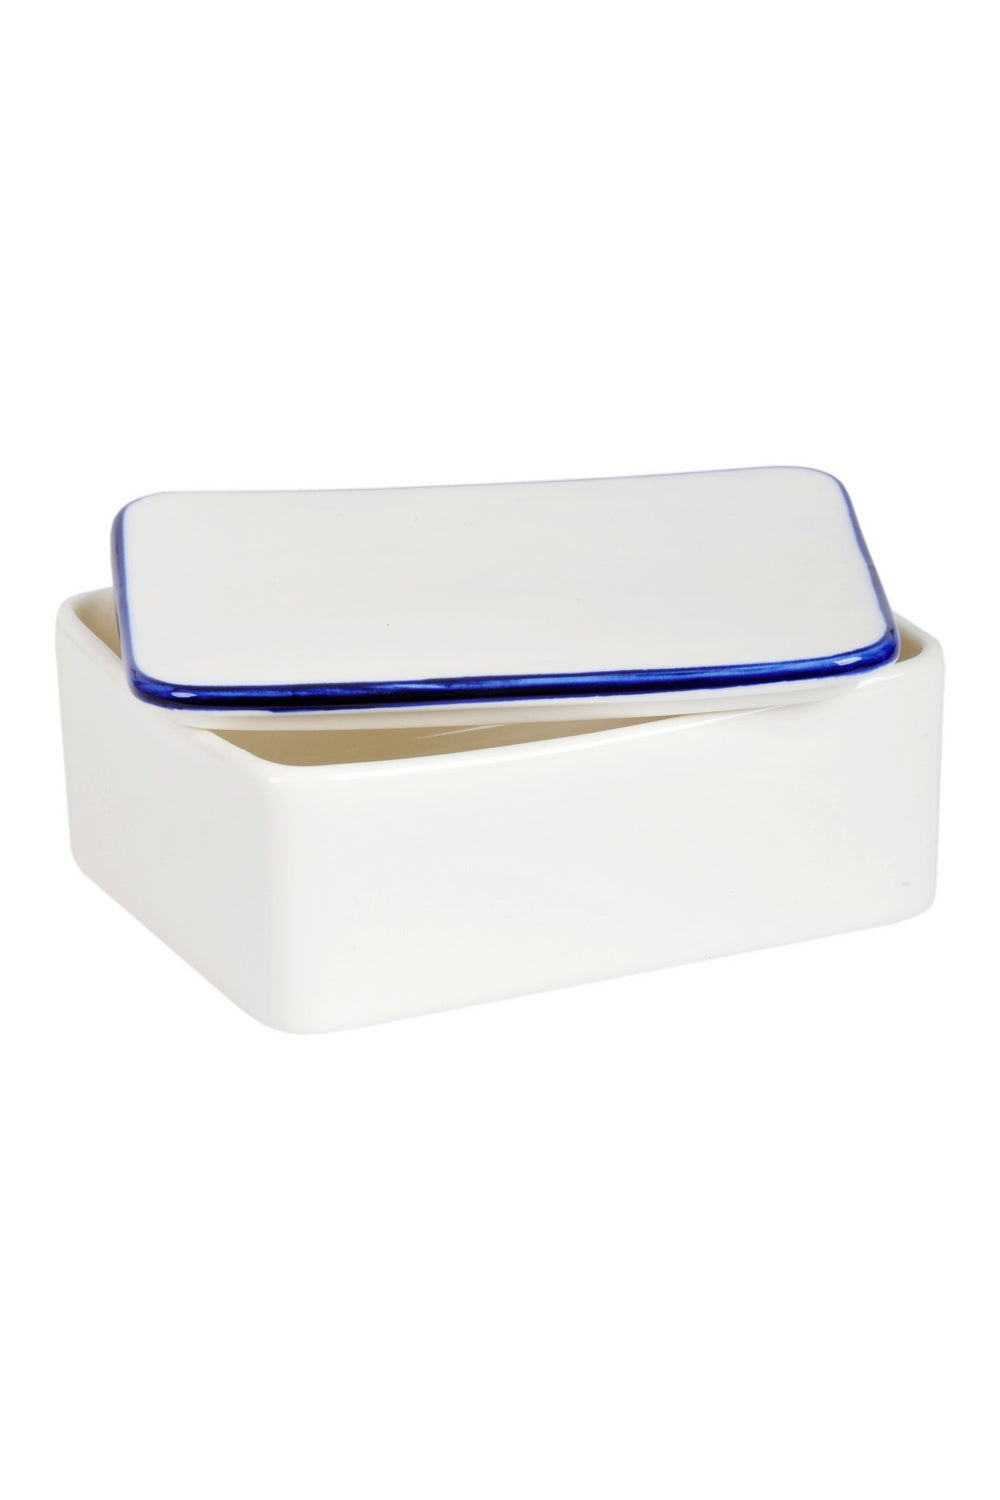 Classic White With Blue Rime Butter Dish